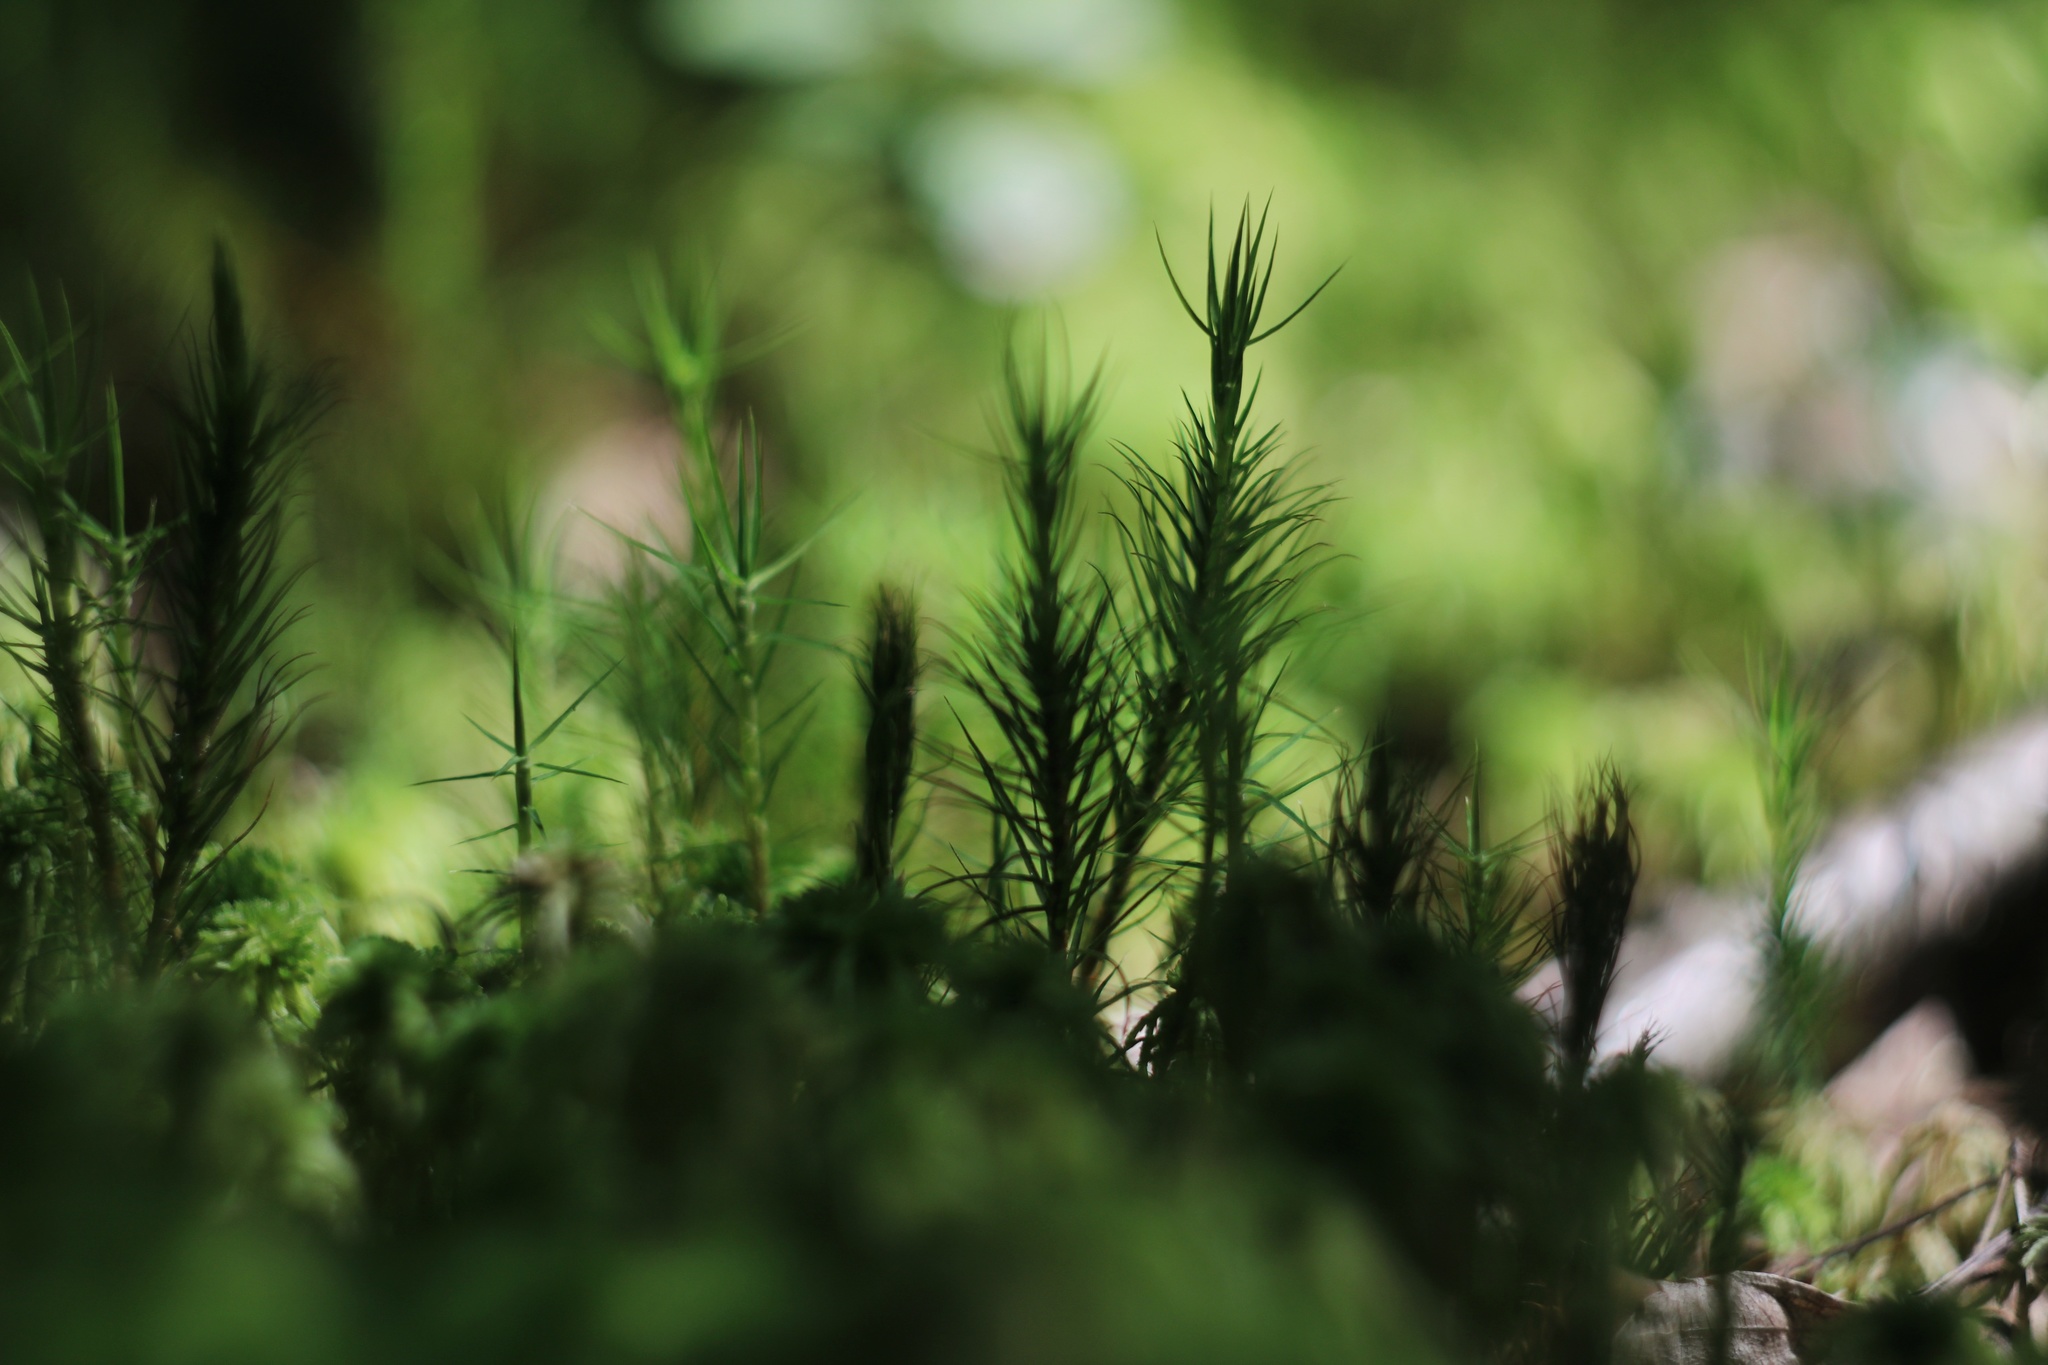 The world is under your feet - My, Forest, Macro photography, Moss, Helios, The photo, Longpost